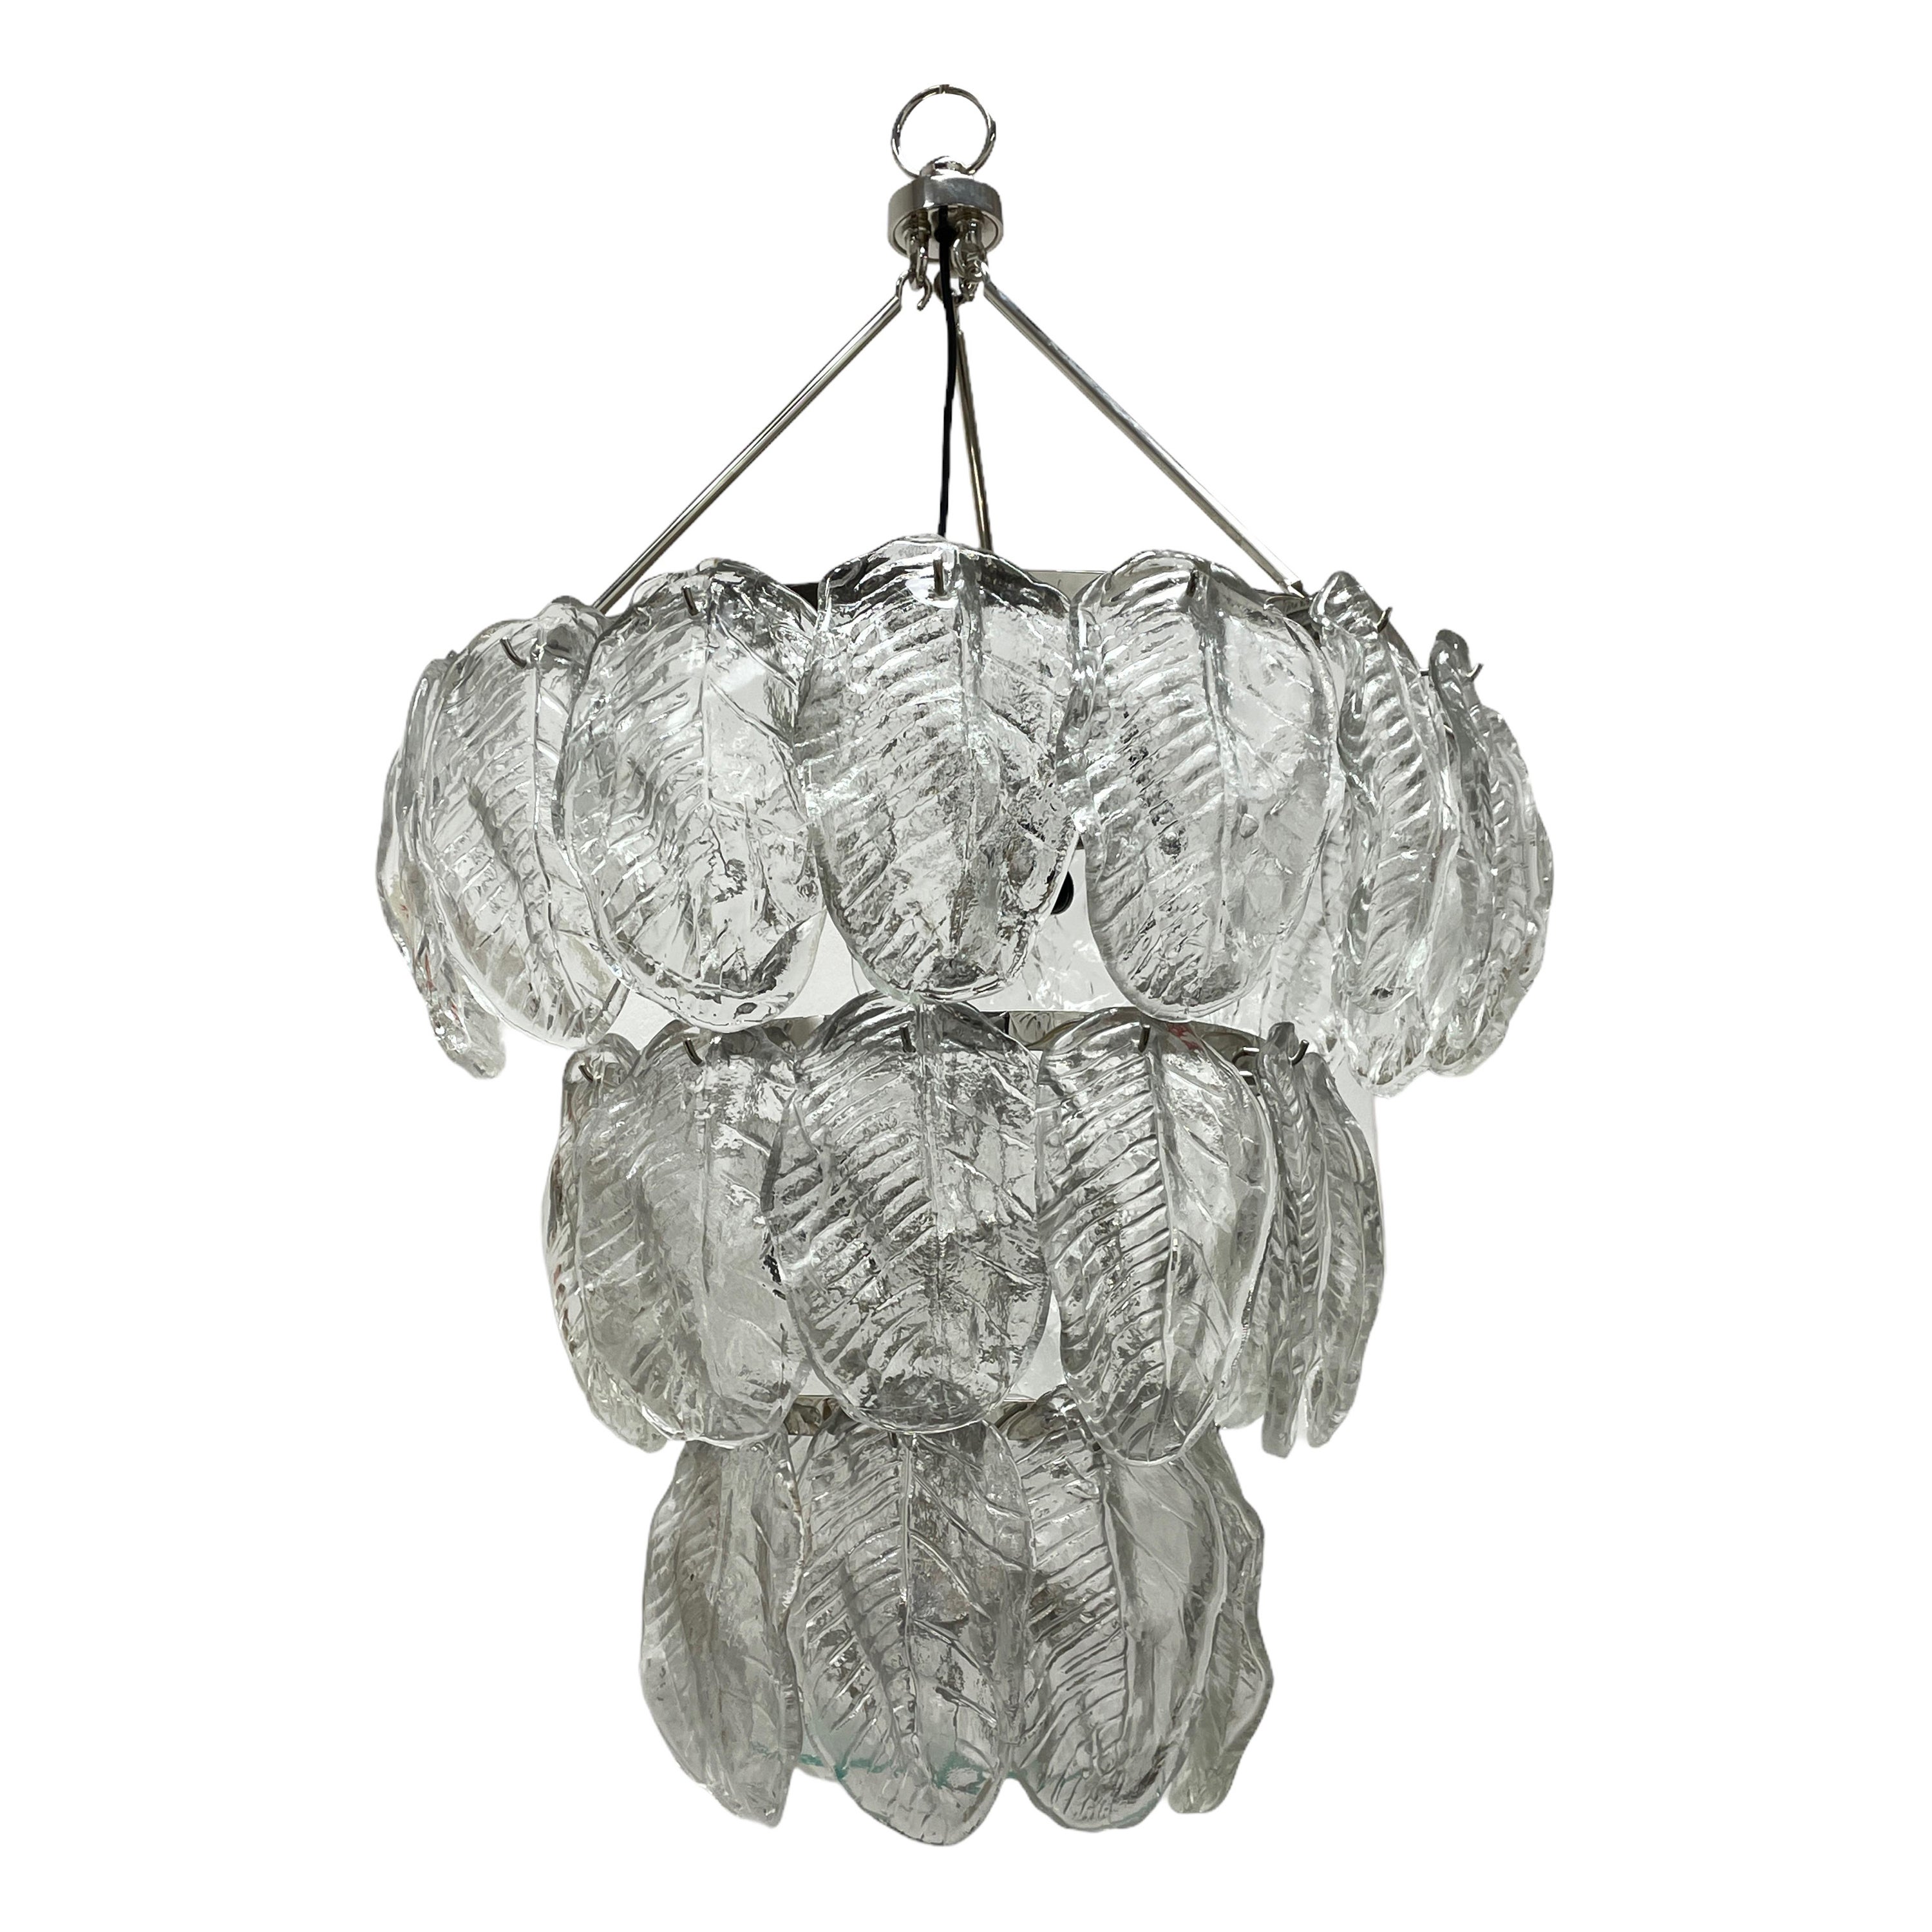 This exquisite large chandelier attributed to the legendary atelier of Venini in Italy, circa 1980s. It features a lot of leaf motif hand blown thick and heavy Murano glass shades. The glass shades hang on a chrome frame. With its clean modernist